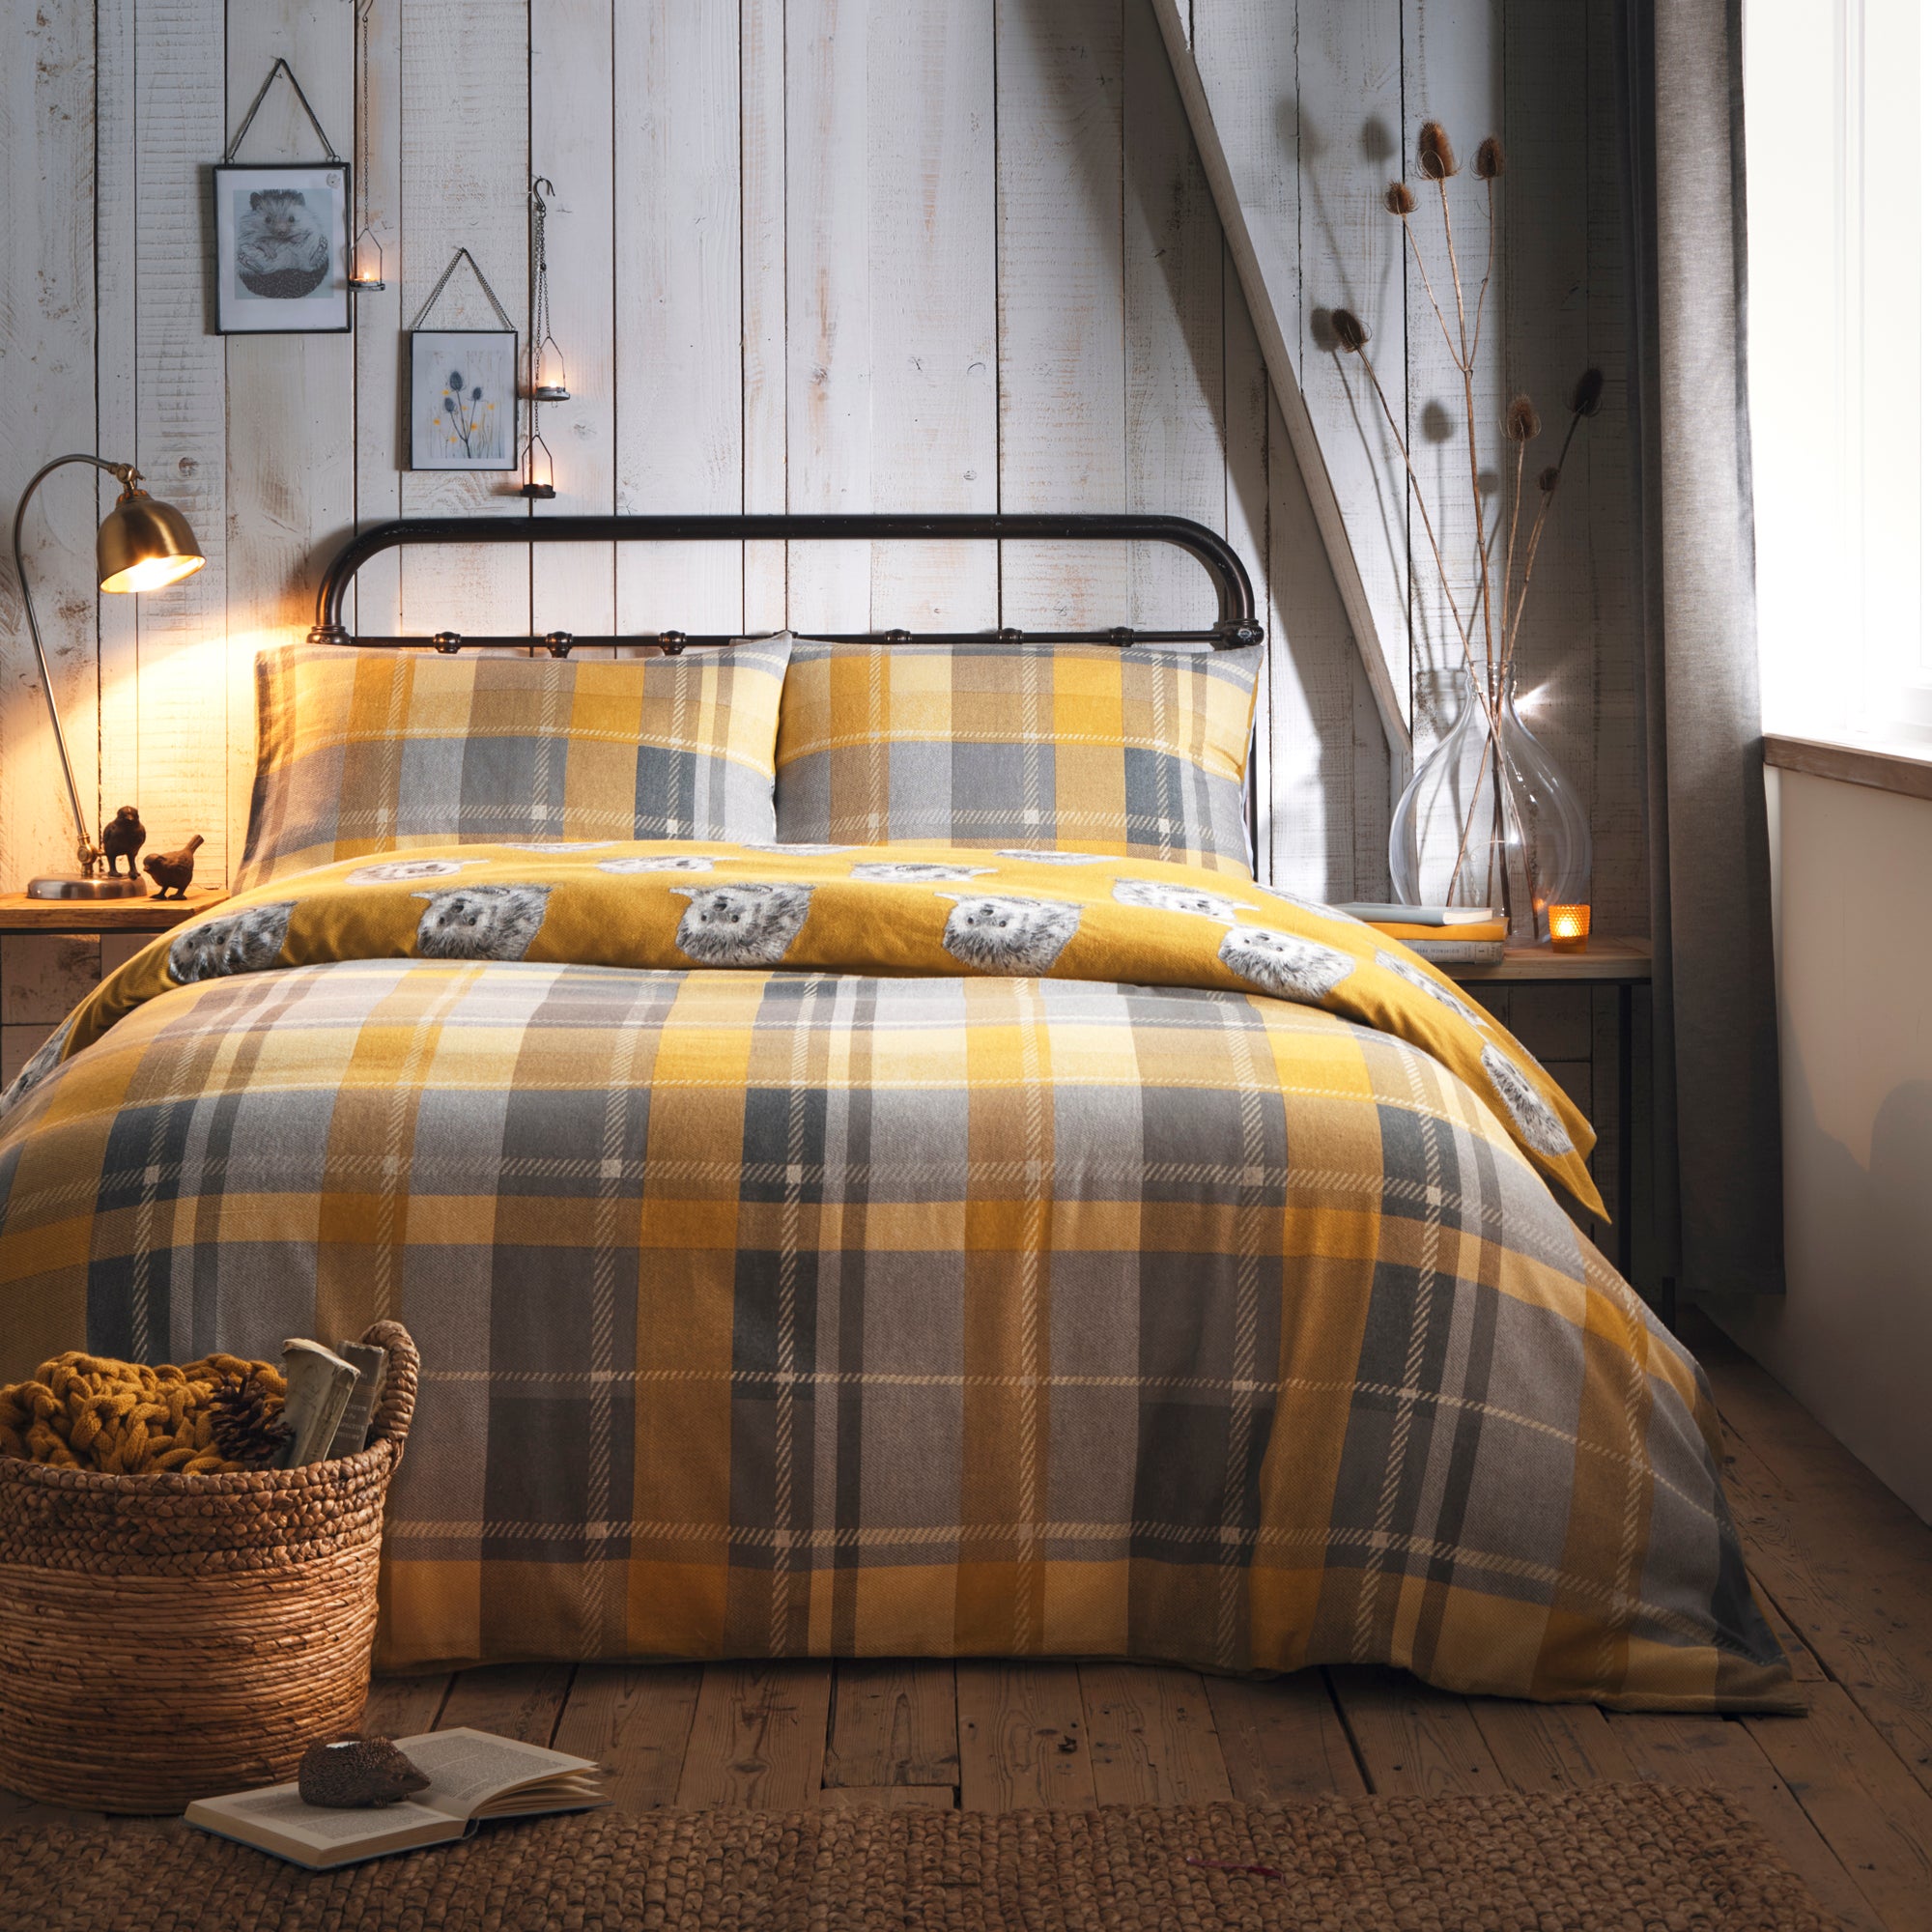 Colville Yellow Checked 100 Brushed Cotton Duvet Cover And Pillowcase Set Yellow Grey And White